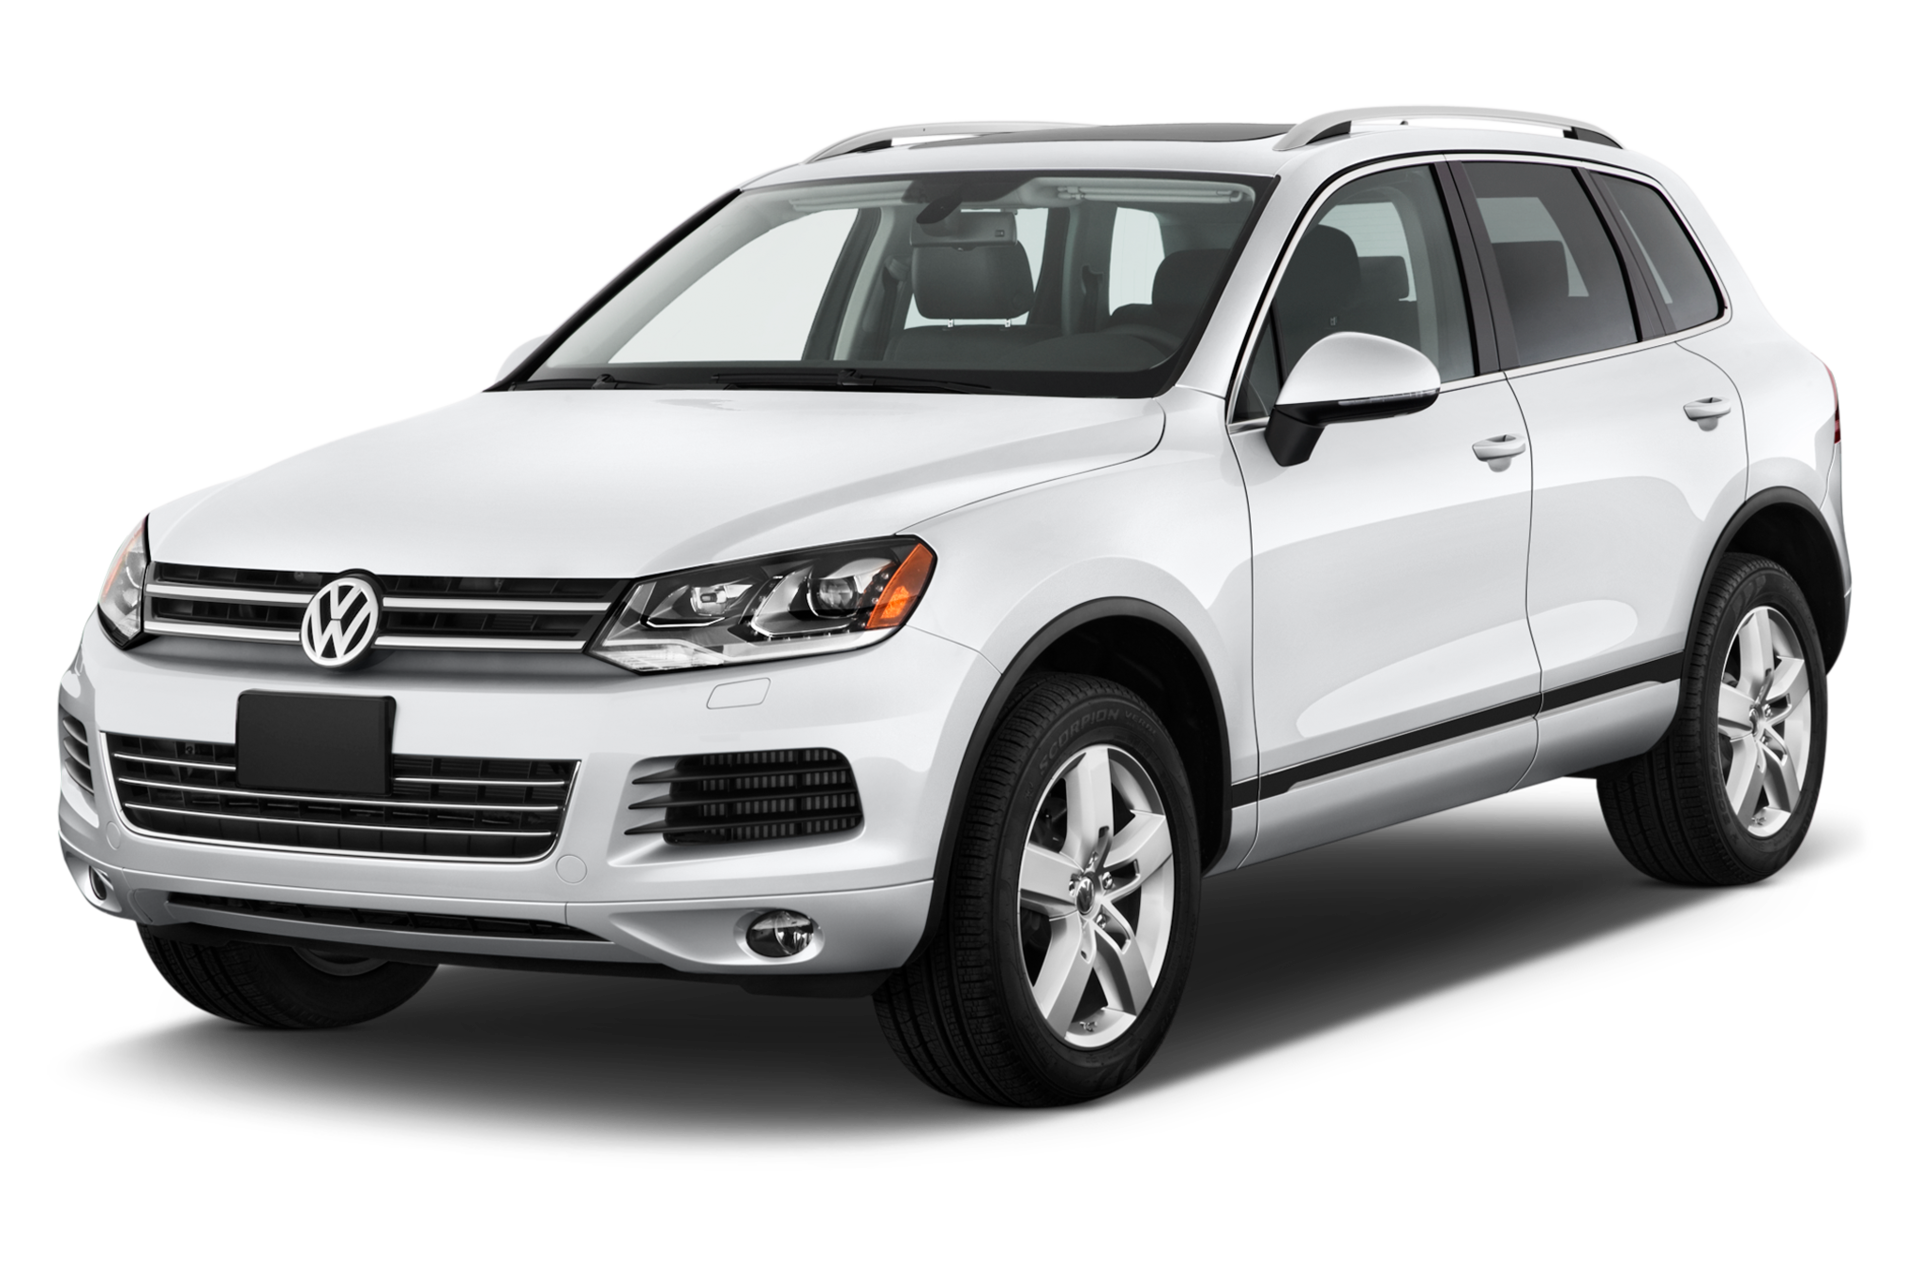 2012 Volkswagen Touareg 2 Prices, Reviews, and Photos - MotorTrend